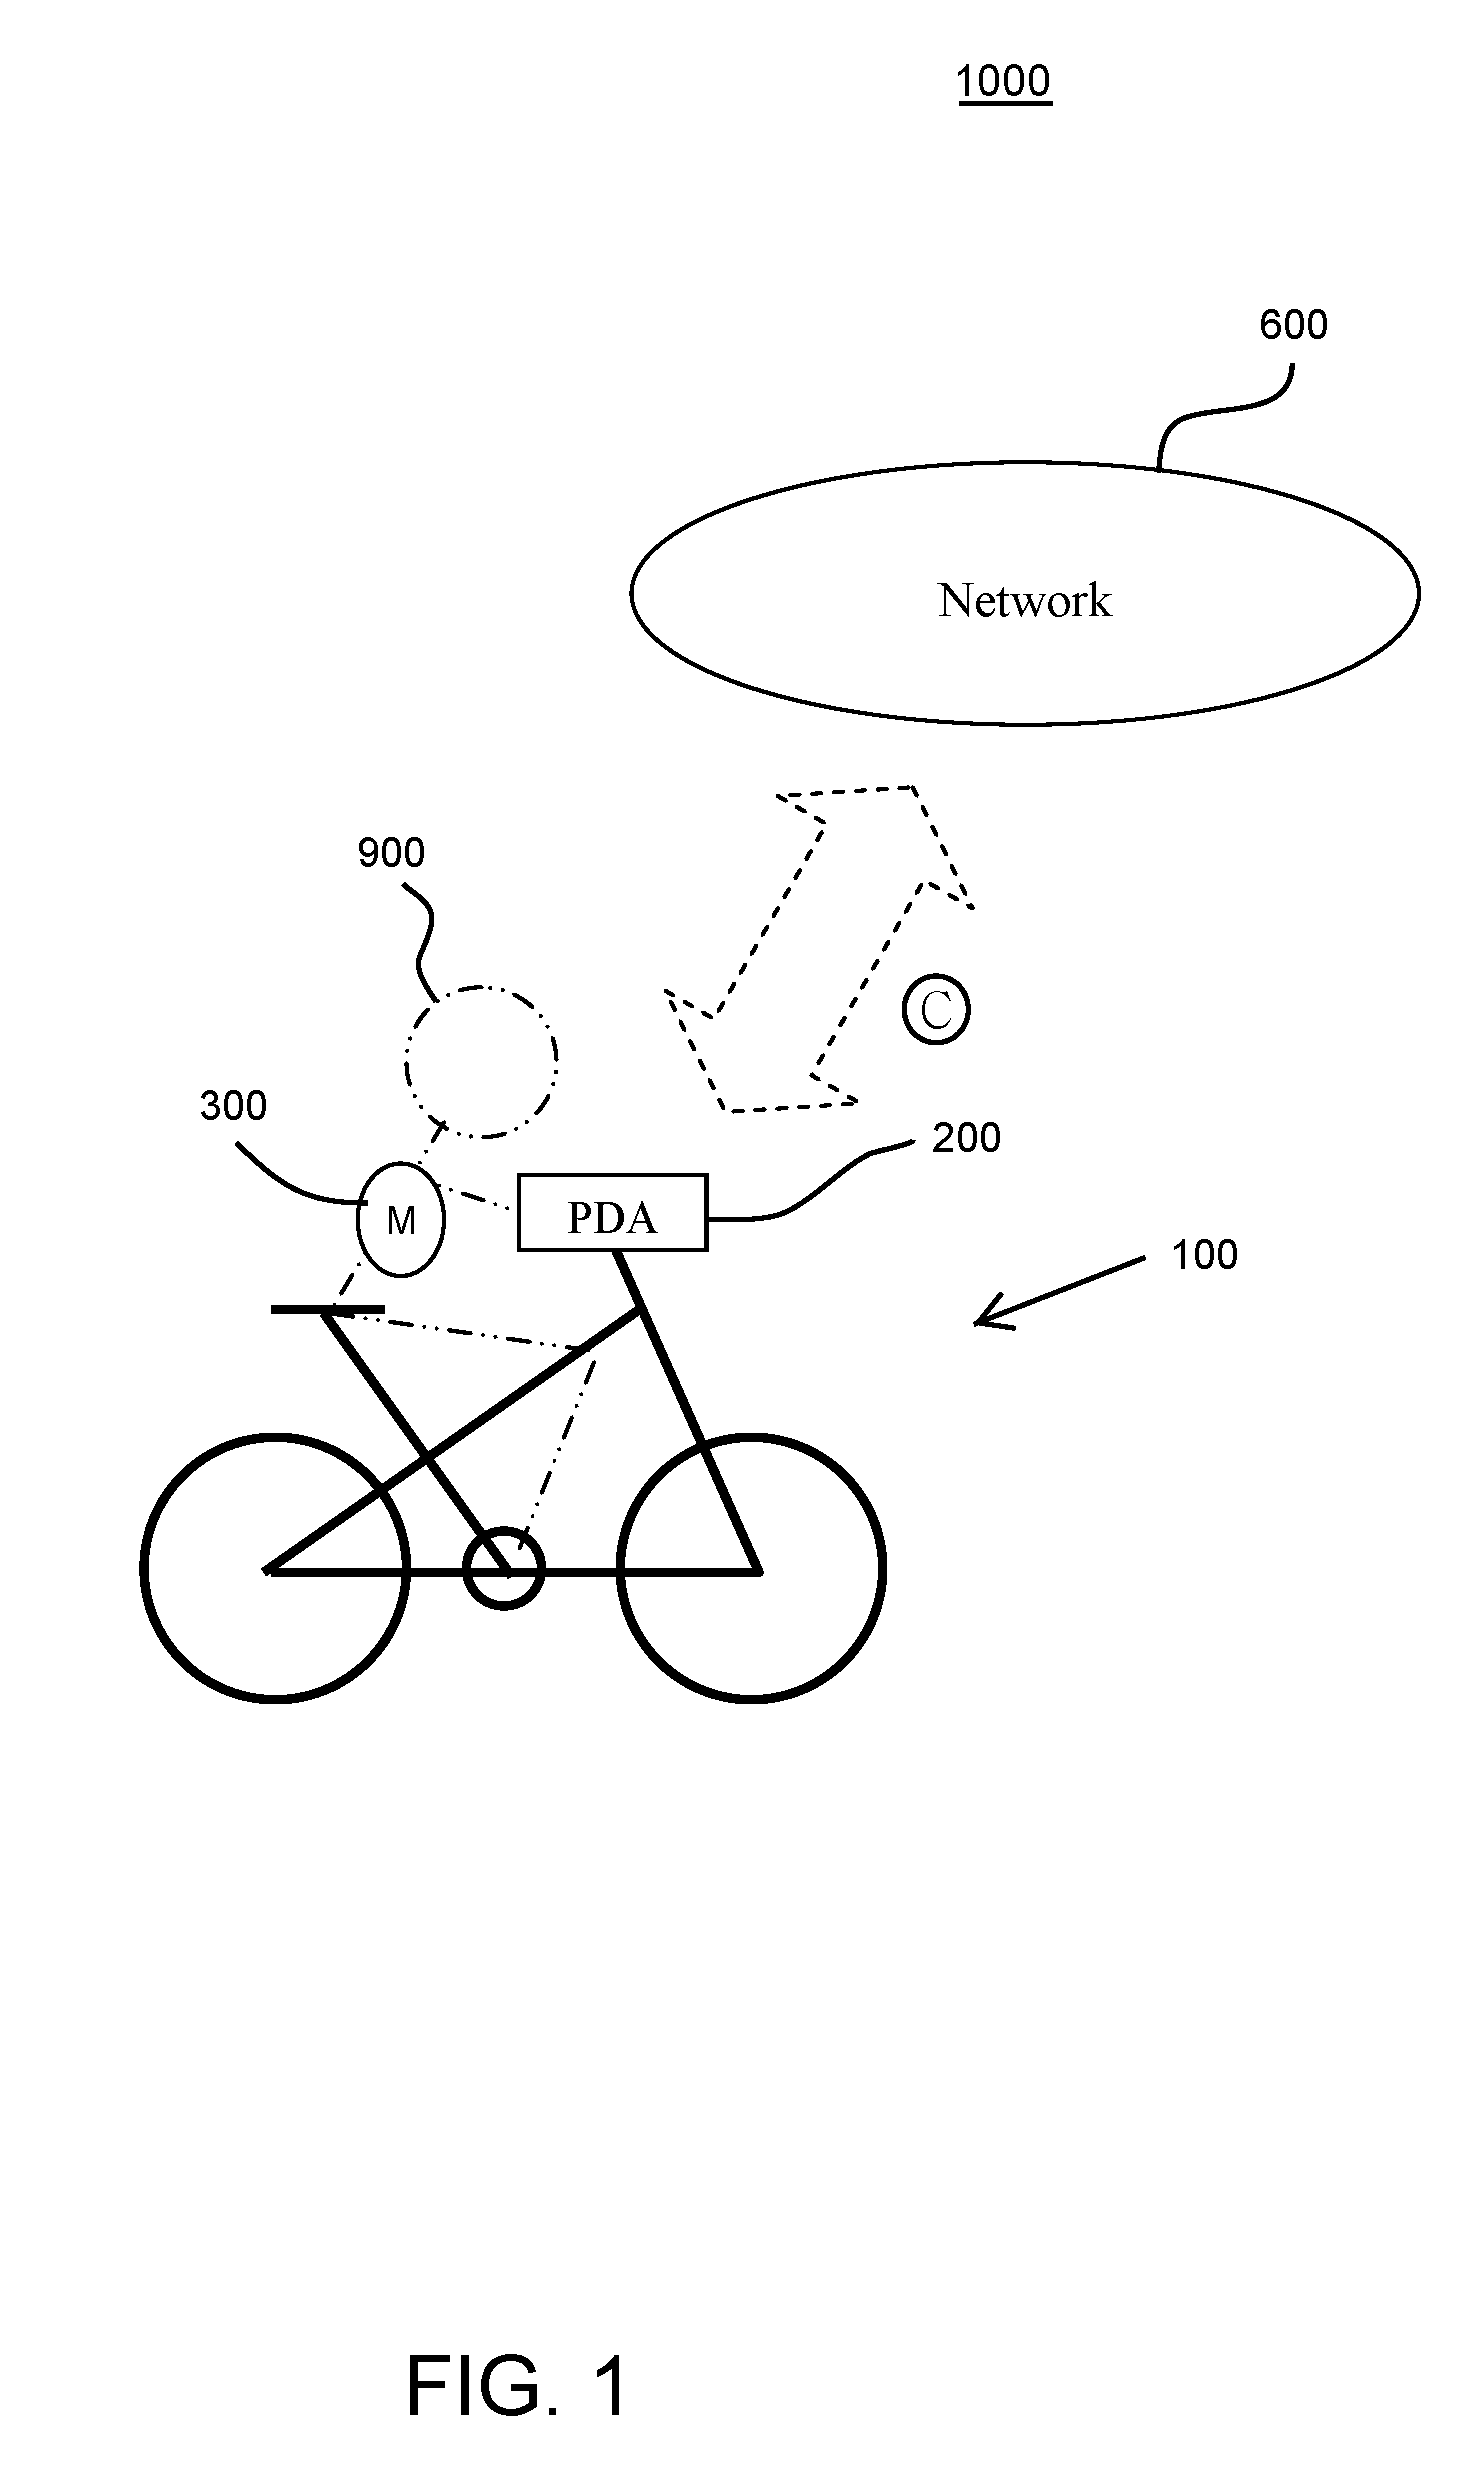 Electric bicycle with personal digital assistant